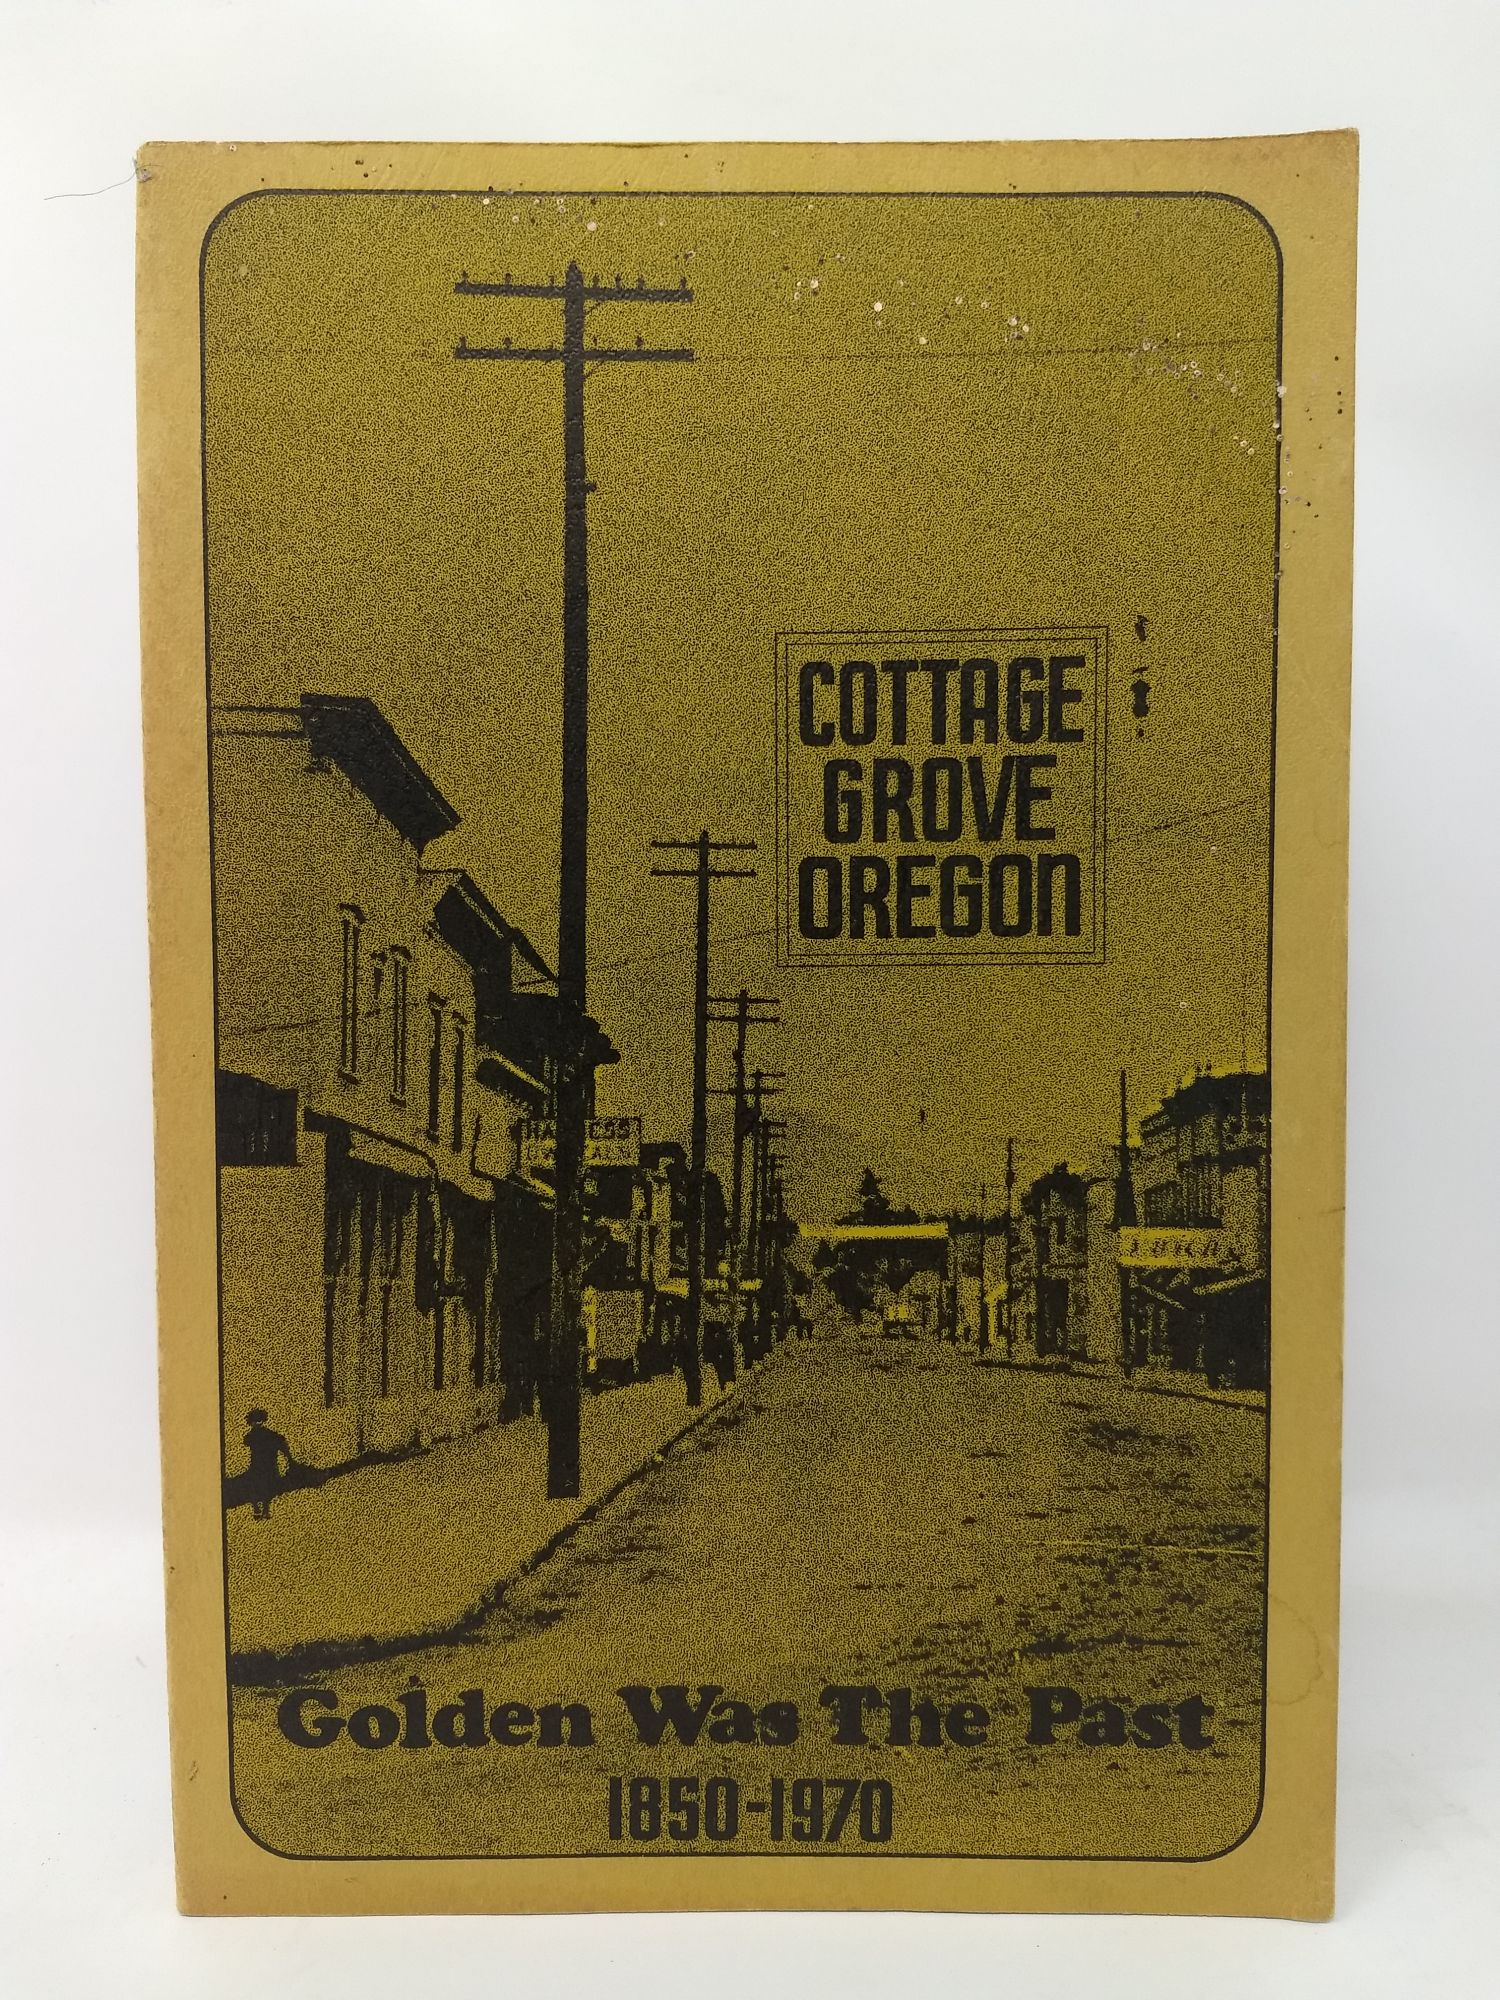 Writers Discussion Group - Cottage Grove, Oregon: Golden Was the Past 1850-1970